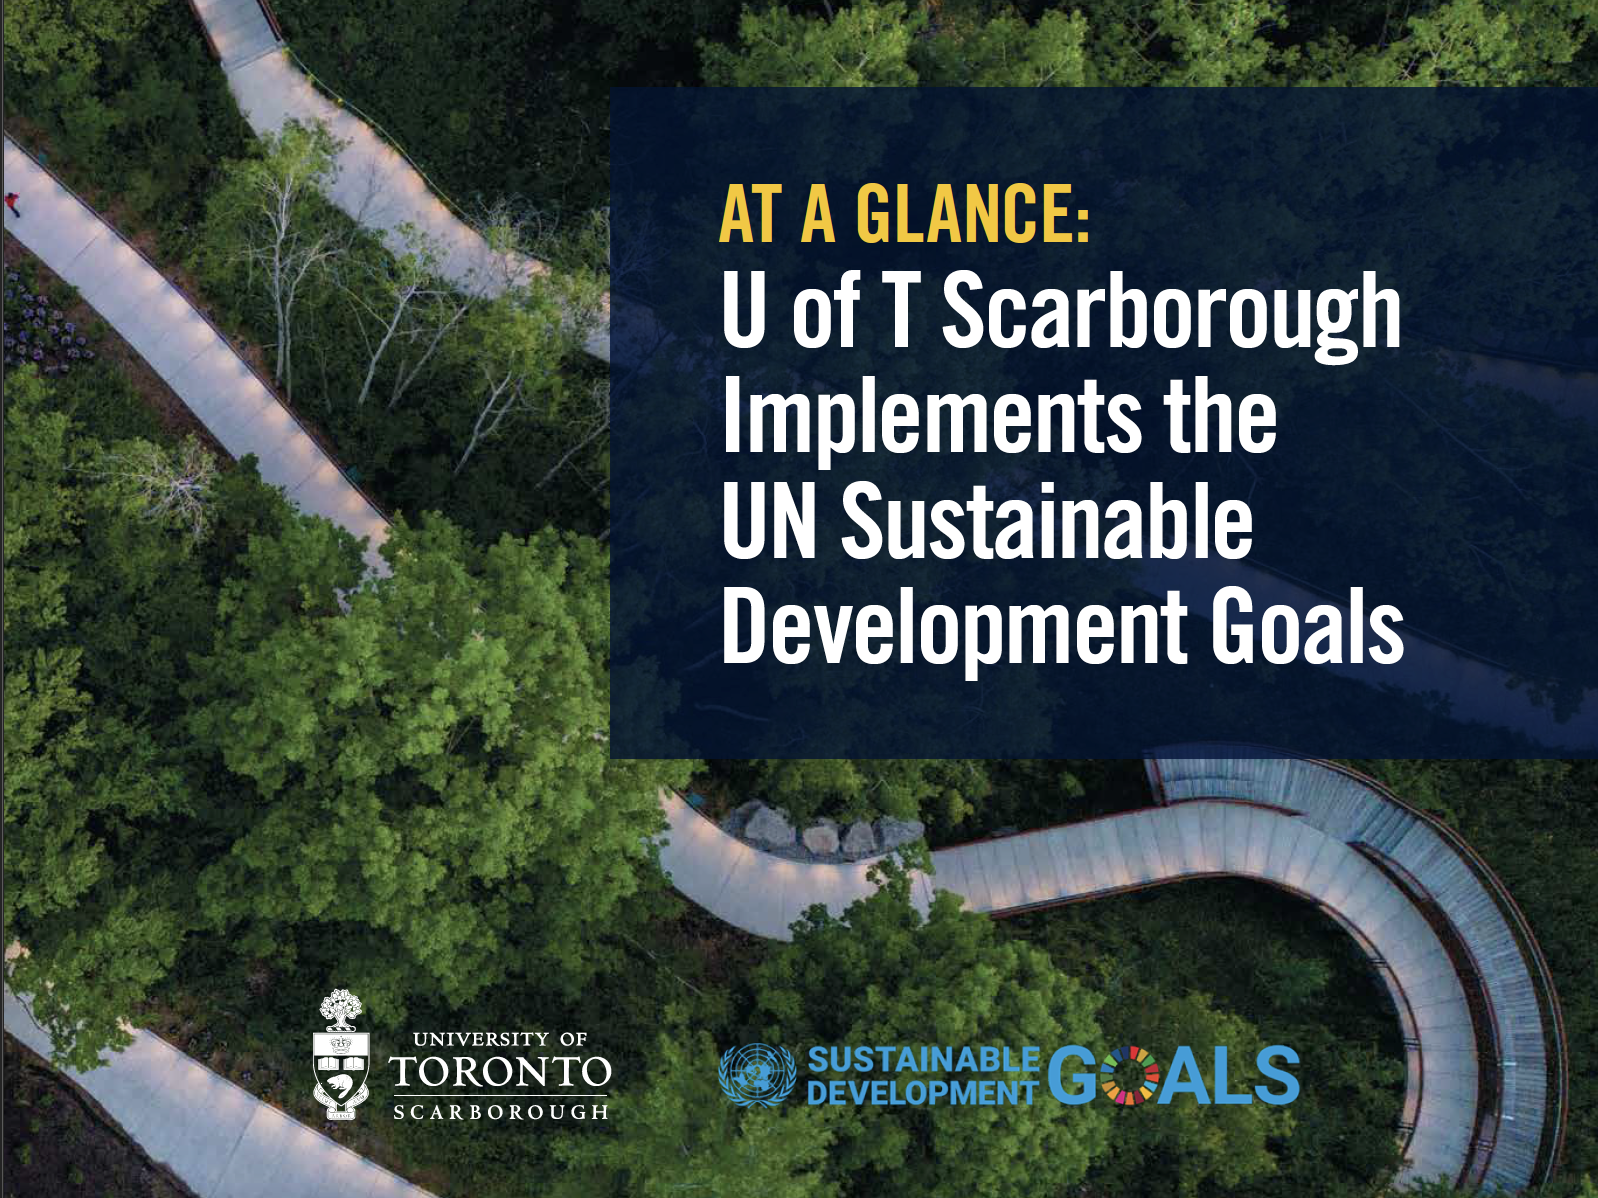 An overhead picture of the Valley Land Trail, with the text "At a Glance: U of T Scarborough Implements the UN Sustainable Development Goals"